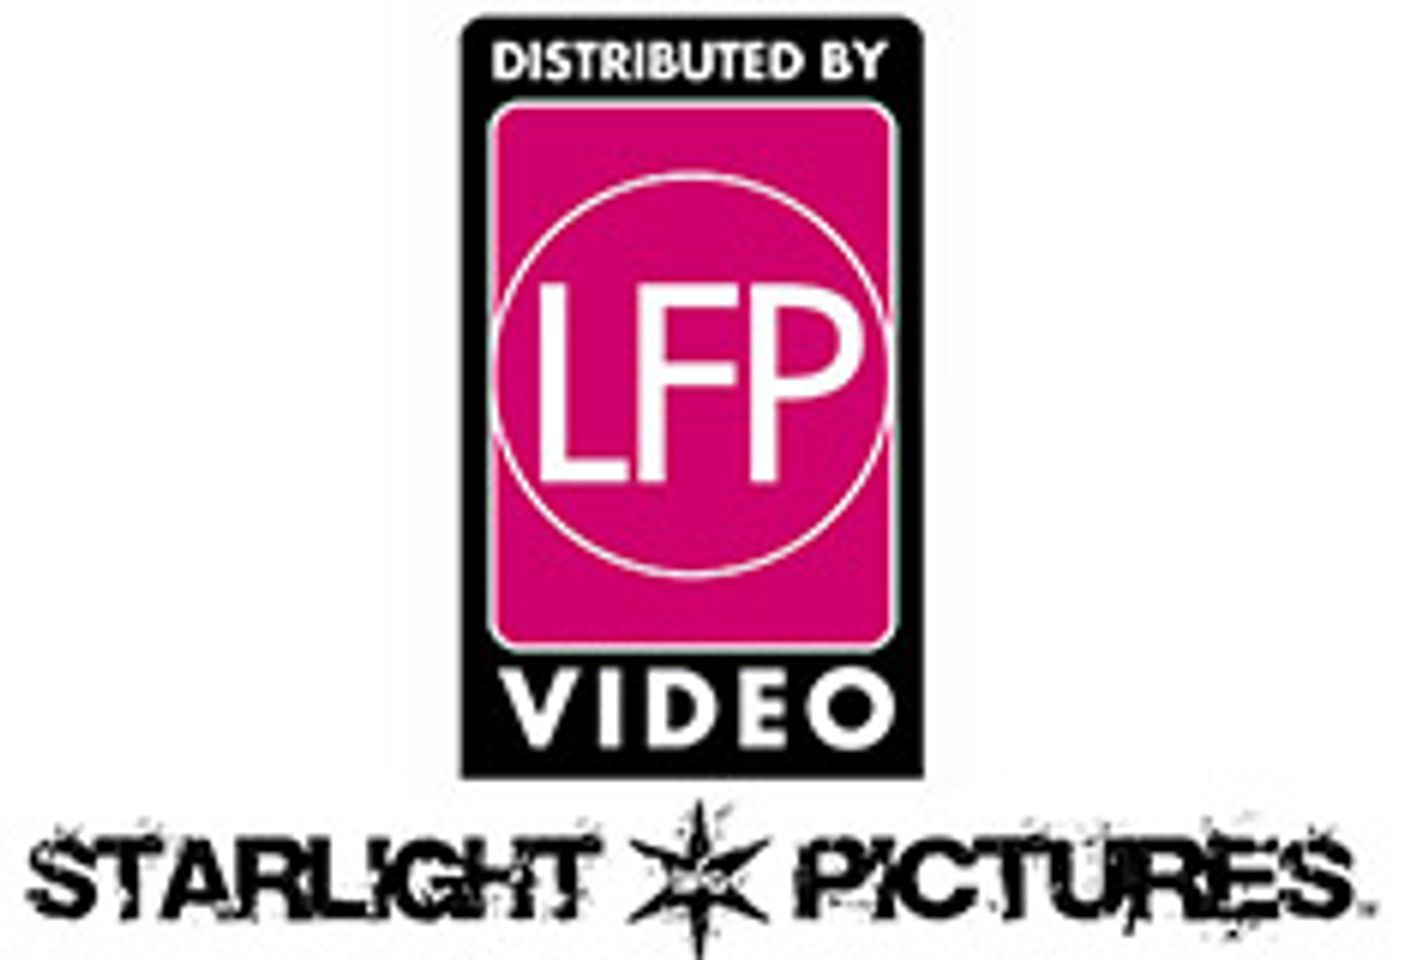 Starlight Pictures Signs Distribution Deal With LFP